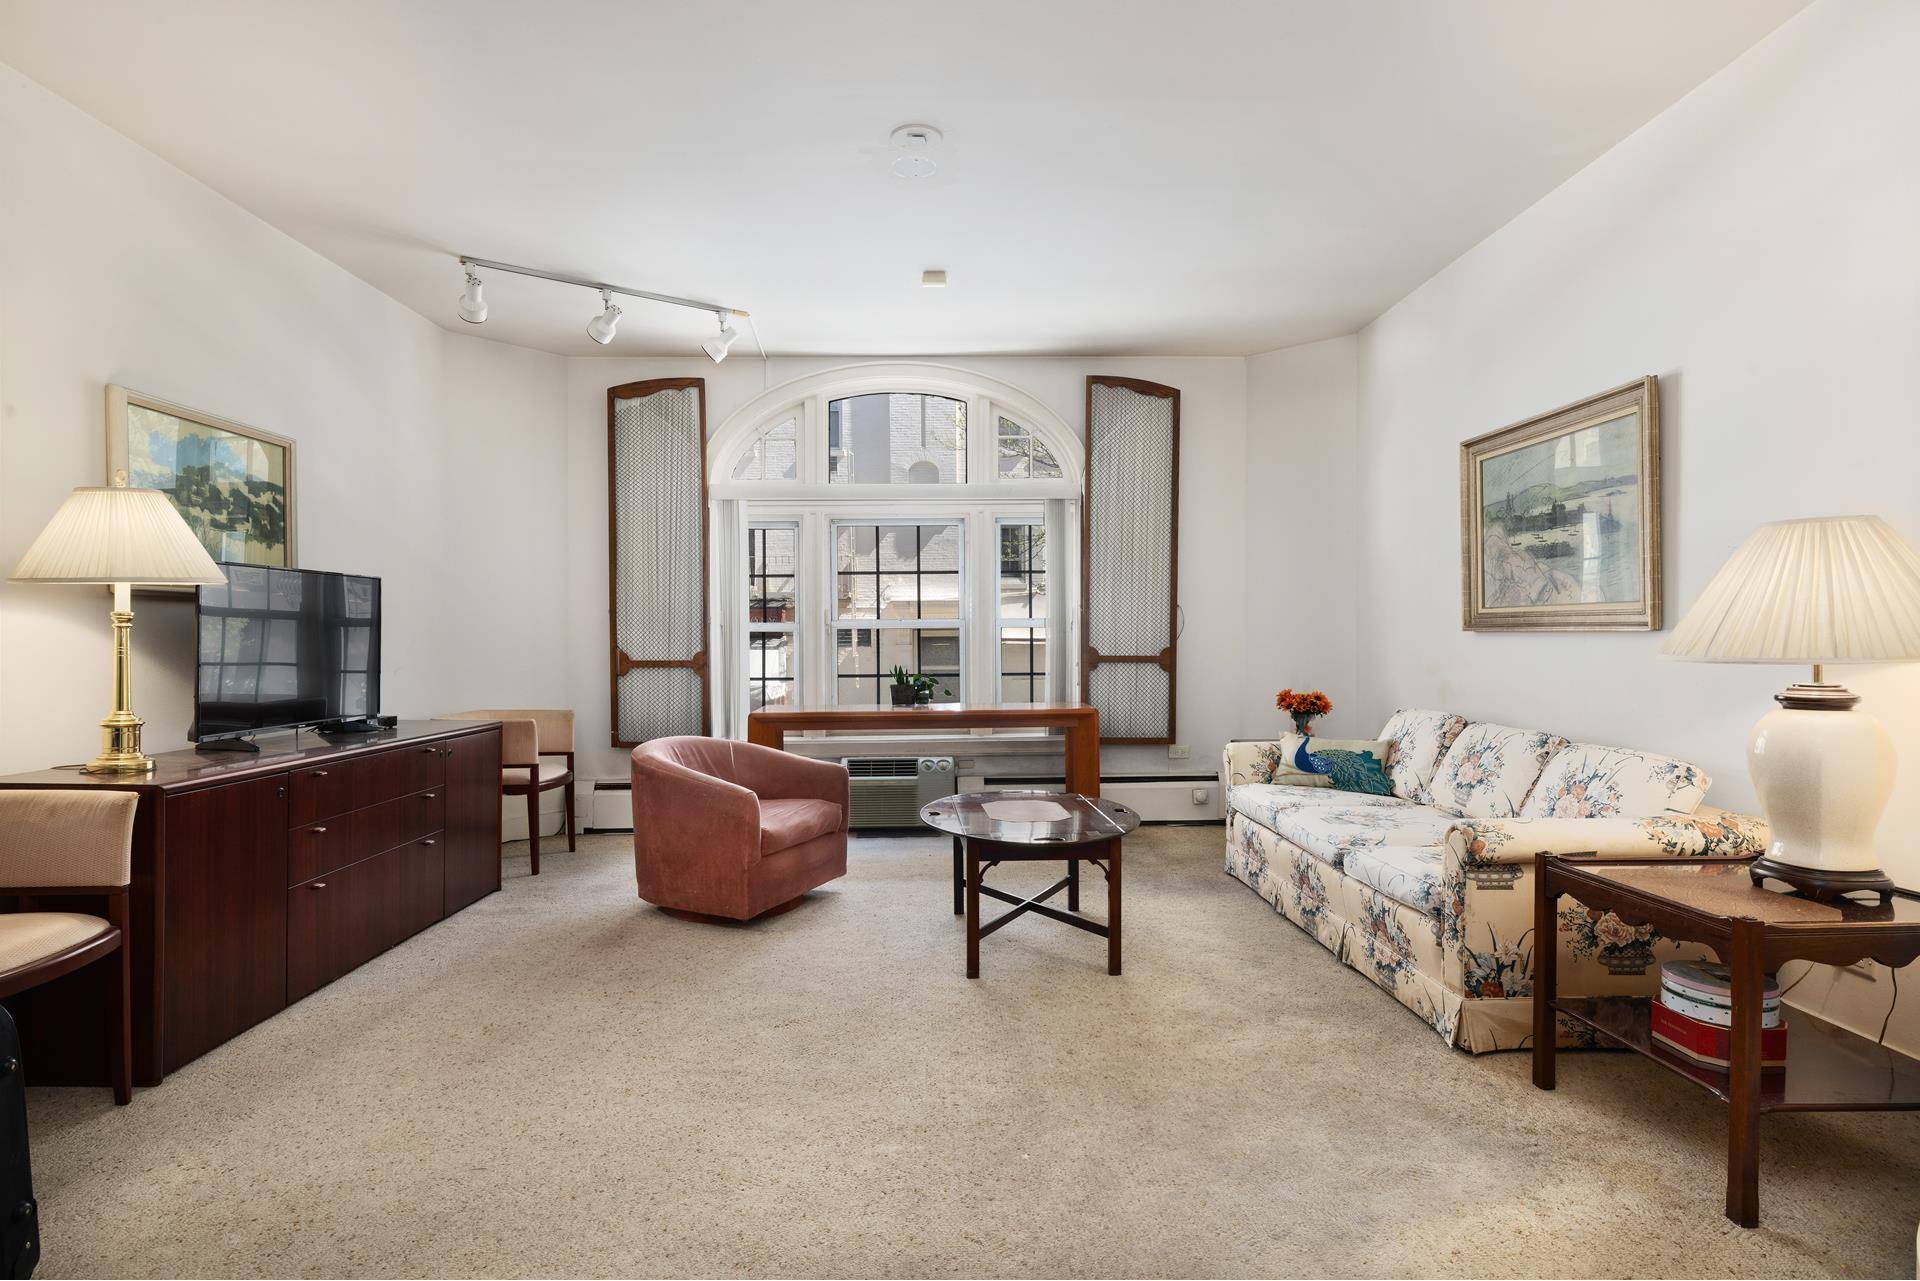 Originally conceived as one of five automobile stables that occupies 168 176 East 75th street, this landmarked town house and its neighbors were designed by Hill and Stout in 1902 ...